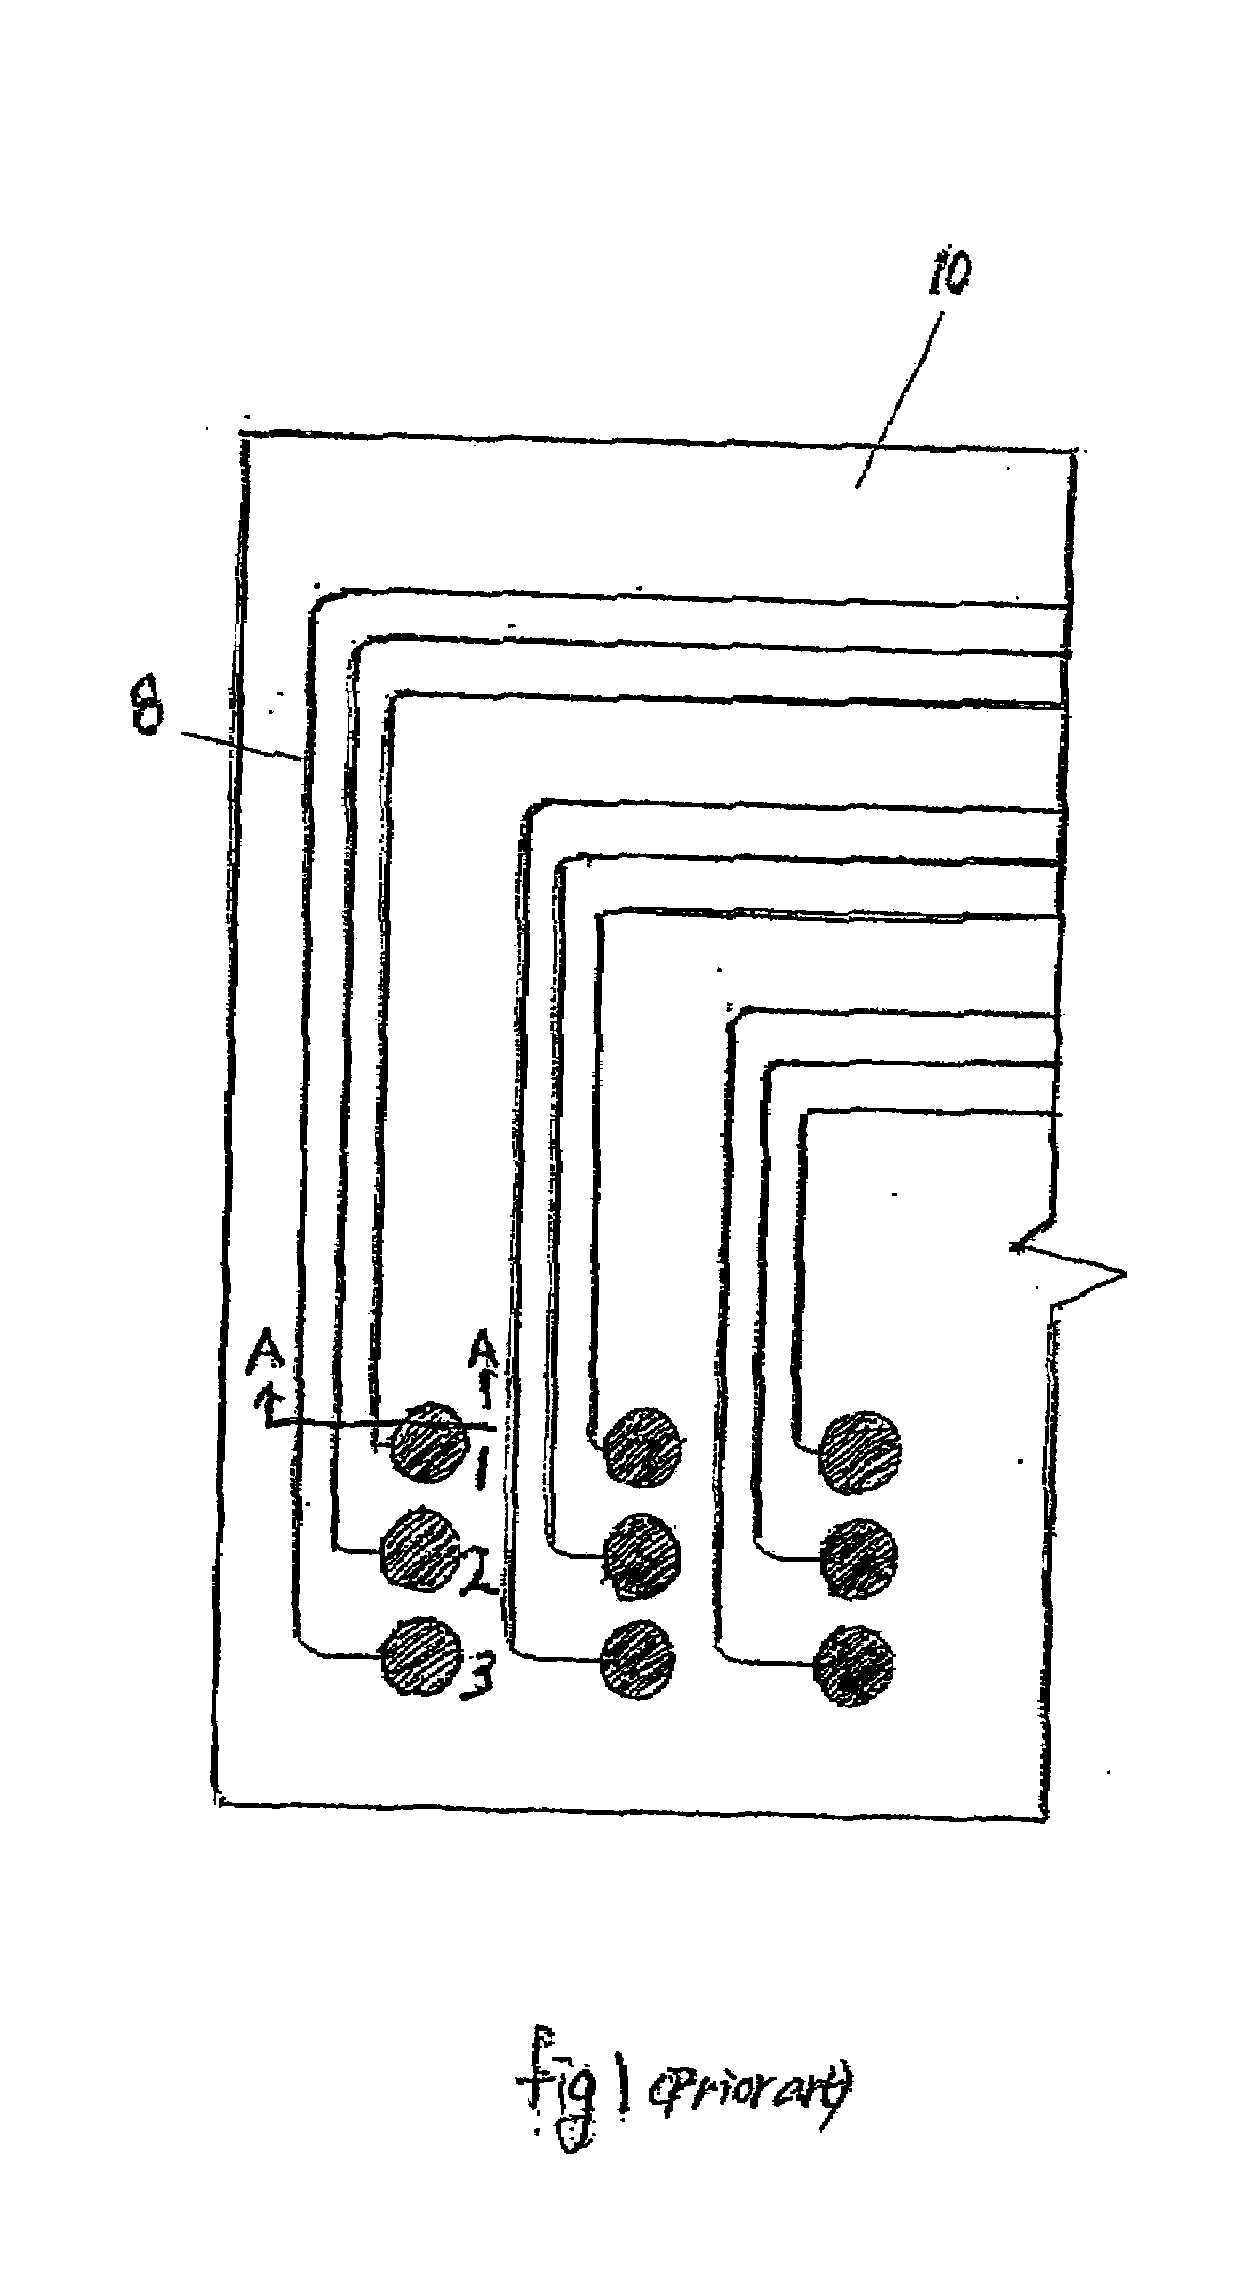 Layered Electrode Array and Cable